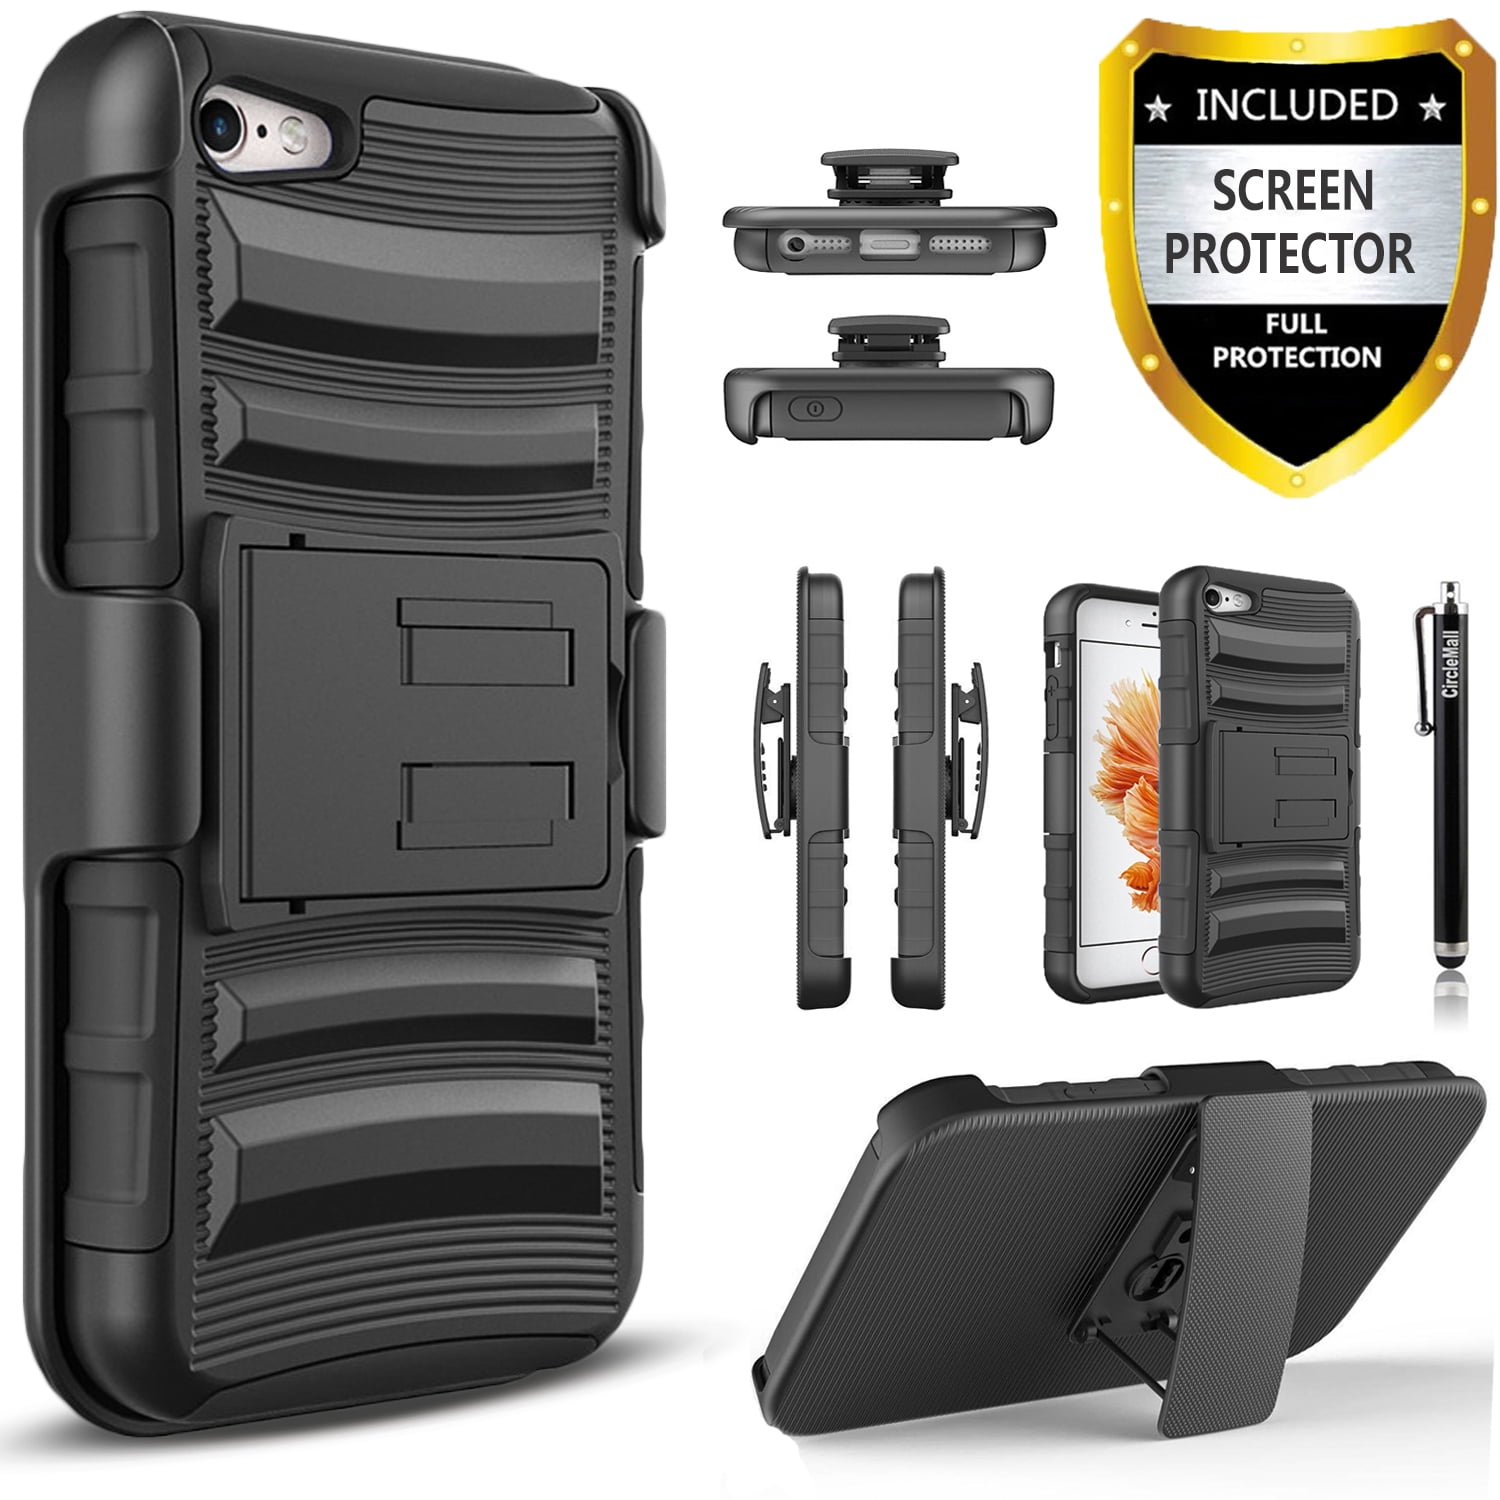 Full Body Military Grade Protection with Carrying Belt Clip | 2-in-1 Screen Protector & Holster Case AlphaCell Cover Compatible with iPhone 7/8 NOT Plus Protective Drop-Proof Shock-Proof